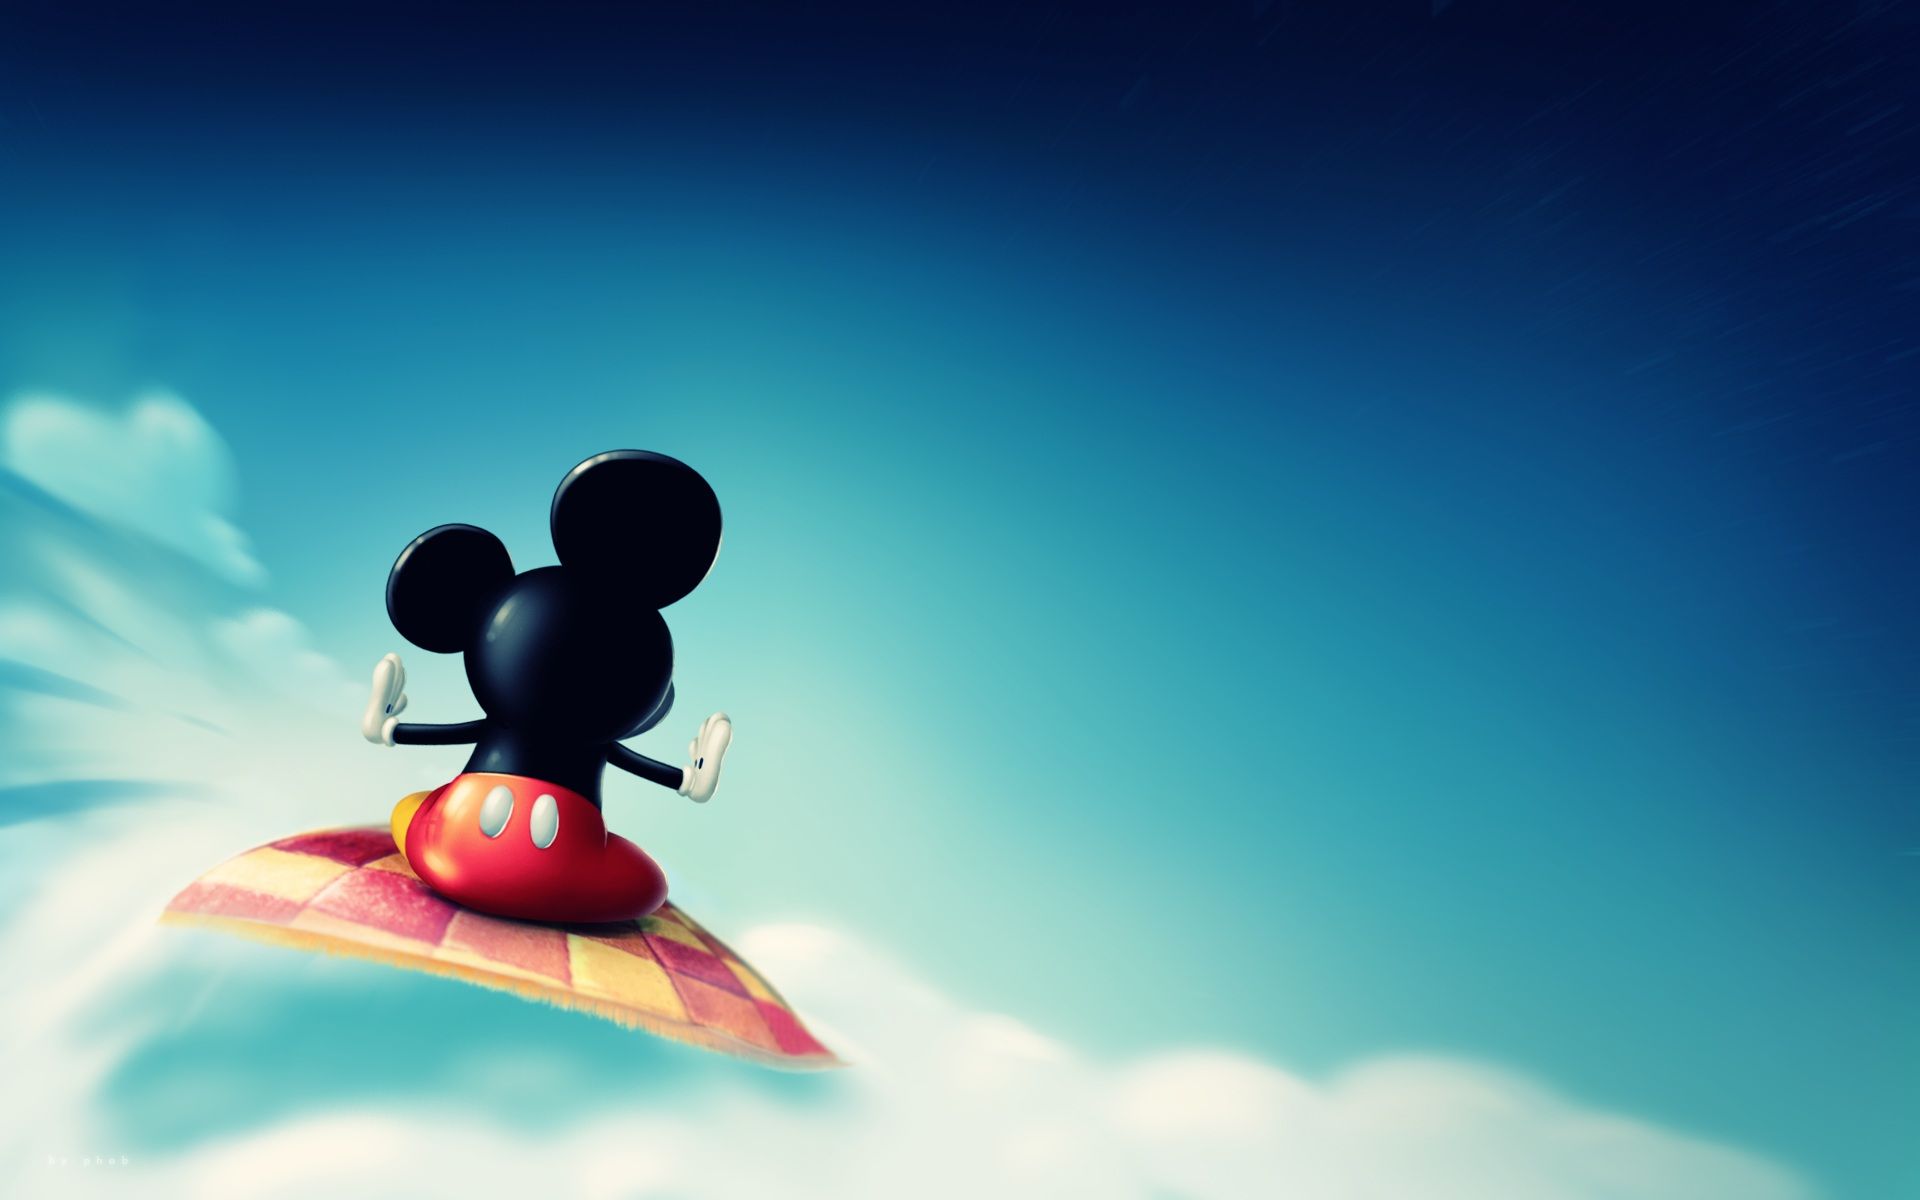 Mickey Mouse Wallpaper For Desktop and You Like This Cartoon Wallpaper